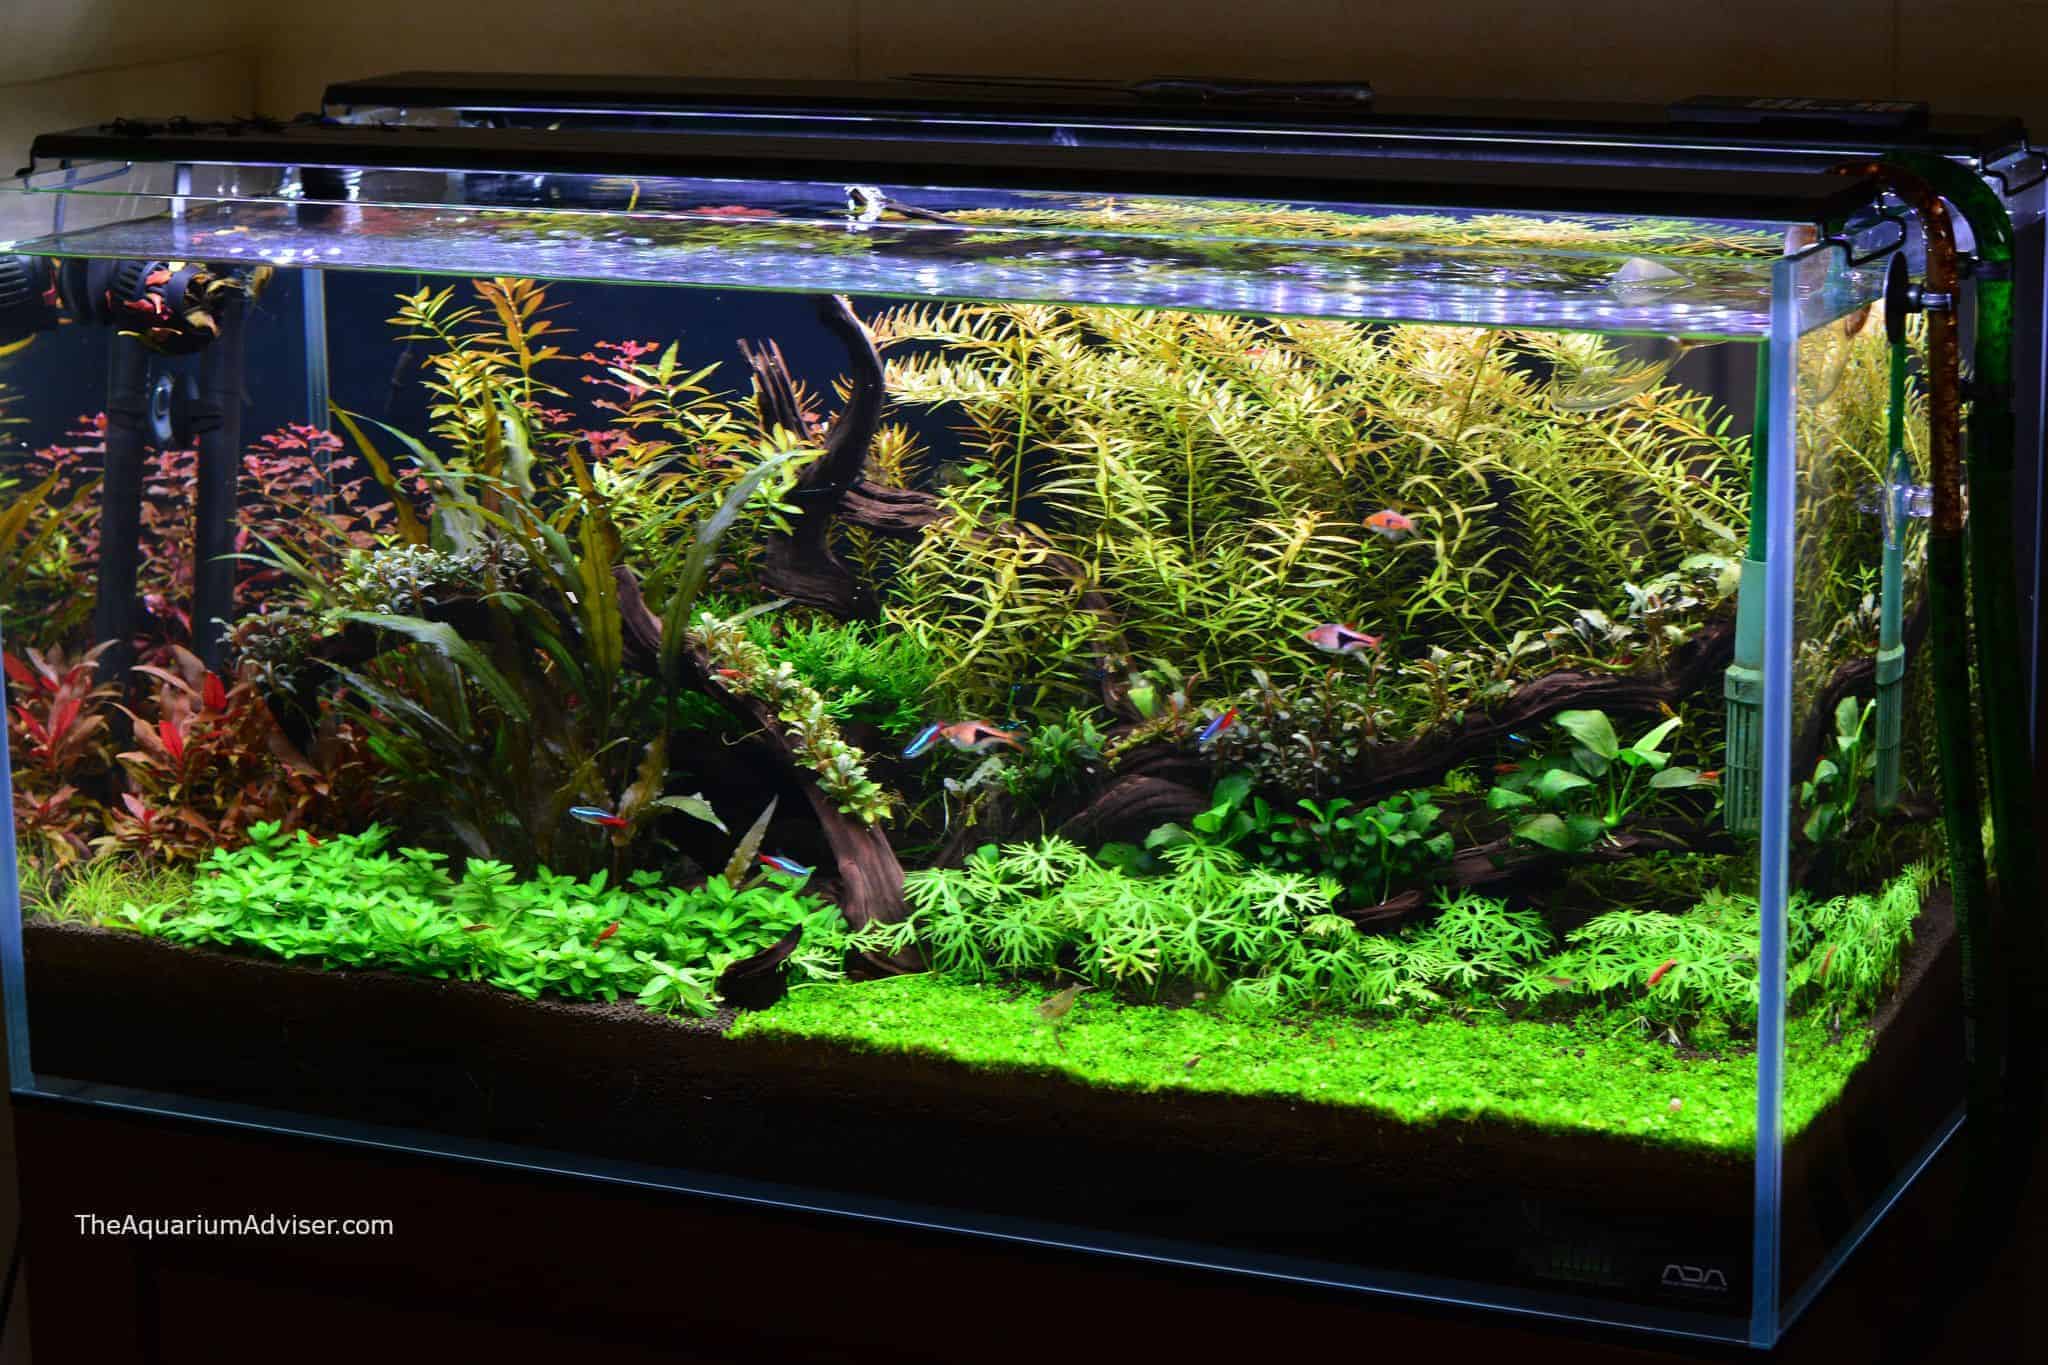 7 Tips for How to Keep Live Plants in an Aquarium - PlanteD Tank